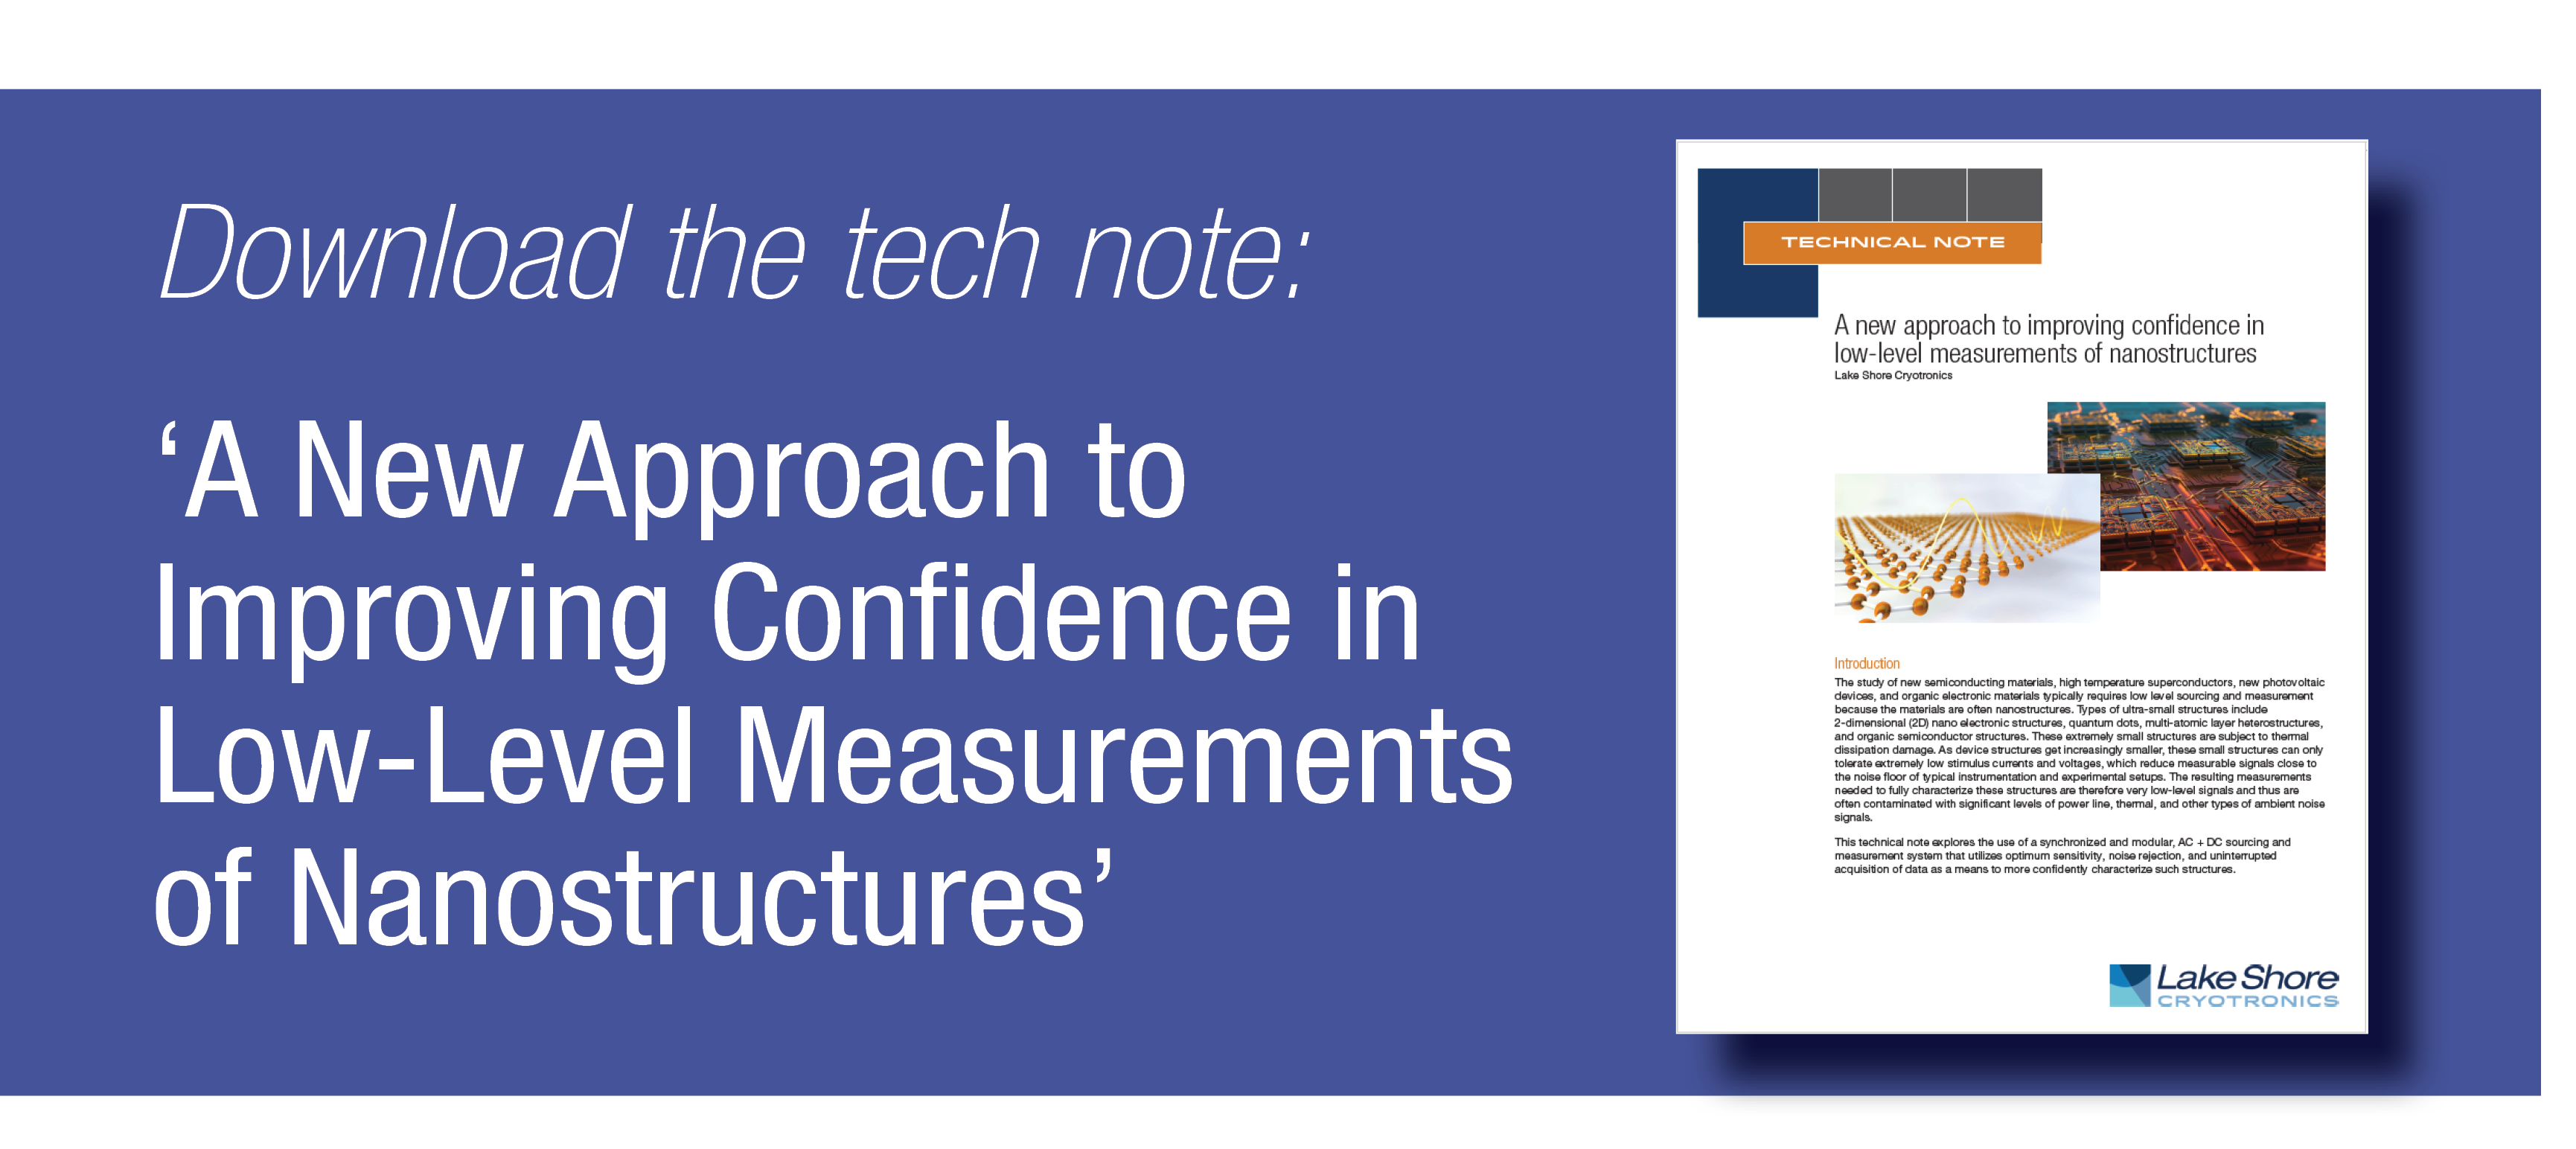 Download a Nanostructure Measurement Tech Note from our partners Lake Shore Cryotronics "A new approach to improving confidence in low-level measurements of nanostructures"